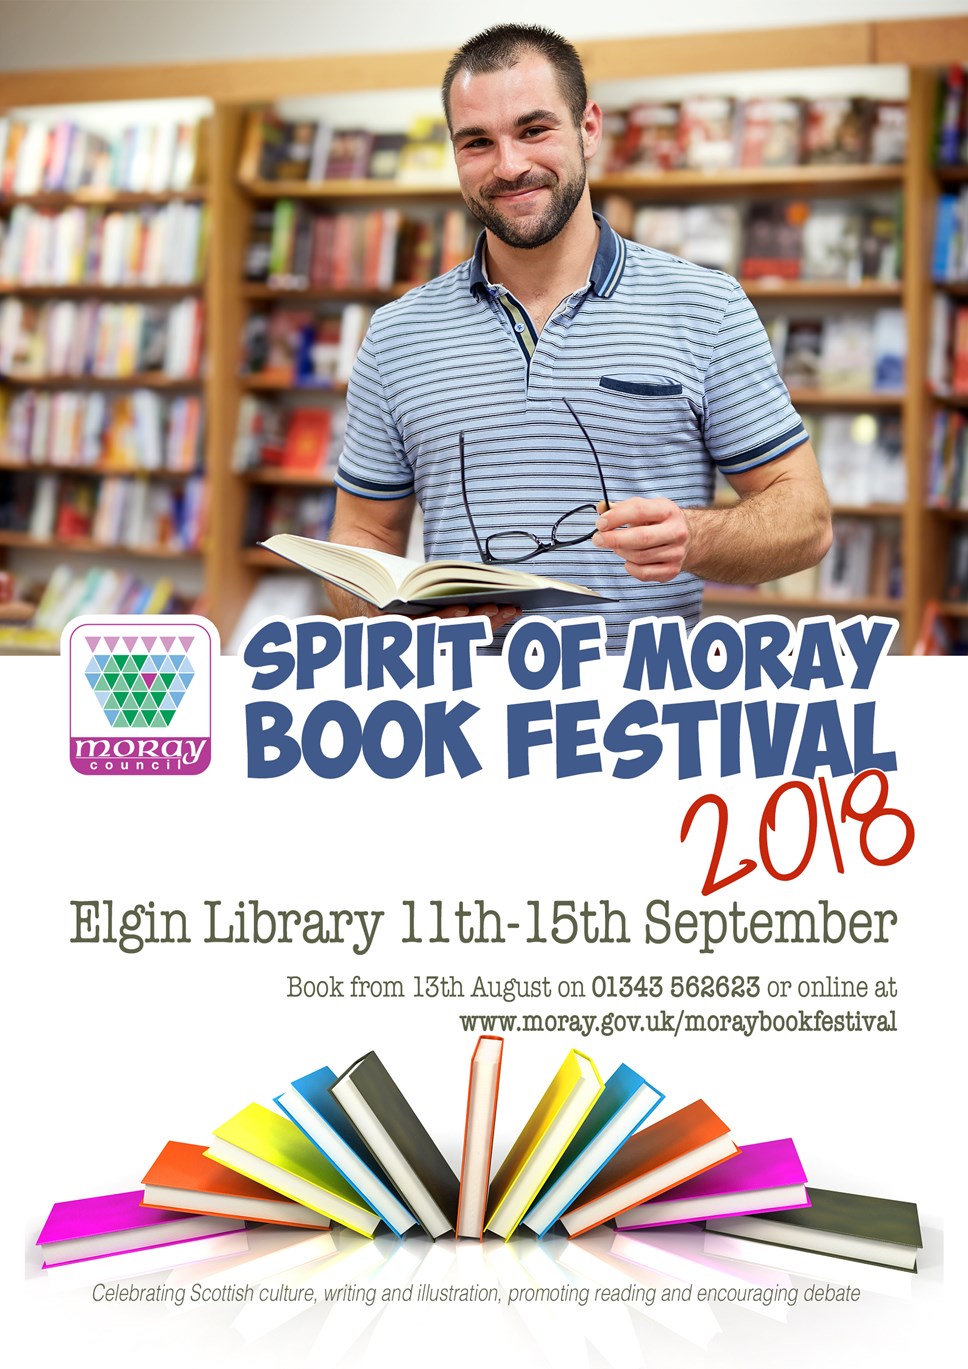 Tickets on sale for Spirit of Moray Book Festival